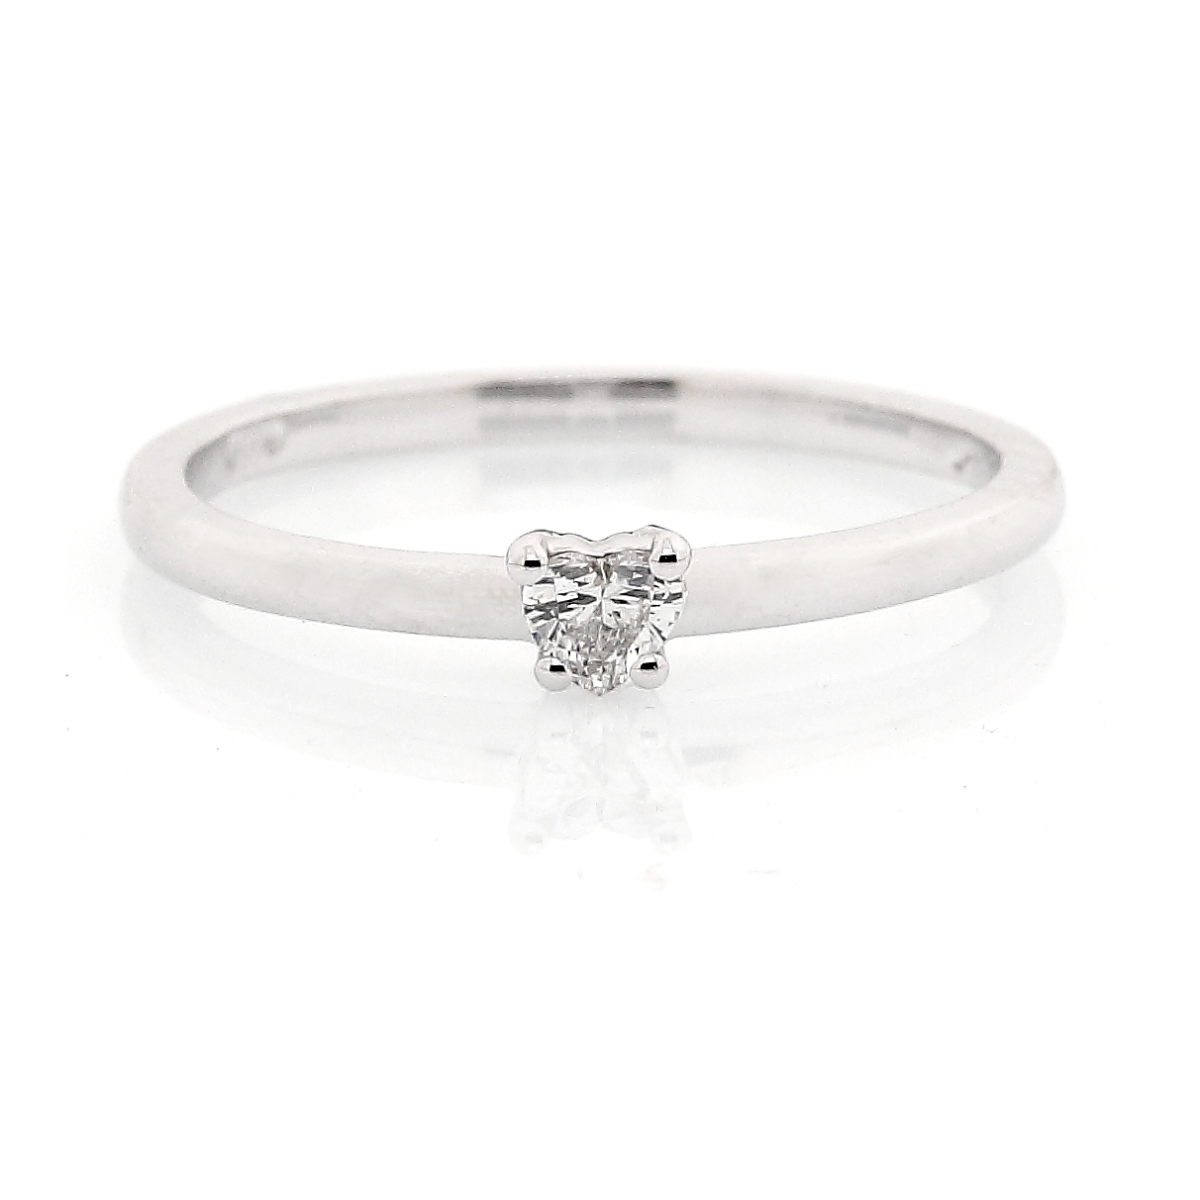 750 Mill. White Gold Ring with Hearth 0,11 Ct. F-Vs Diamond